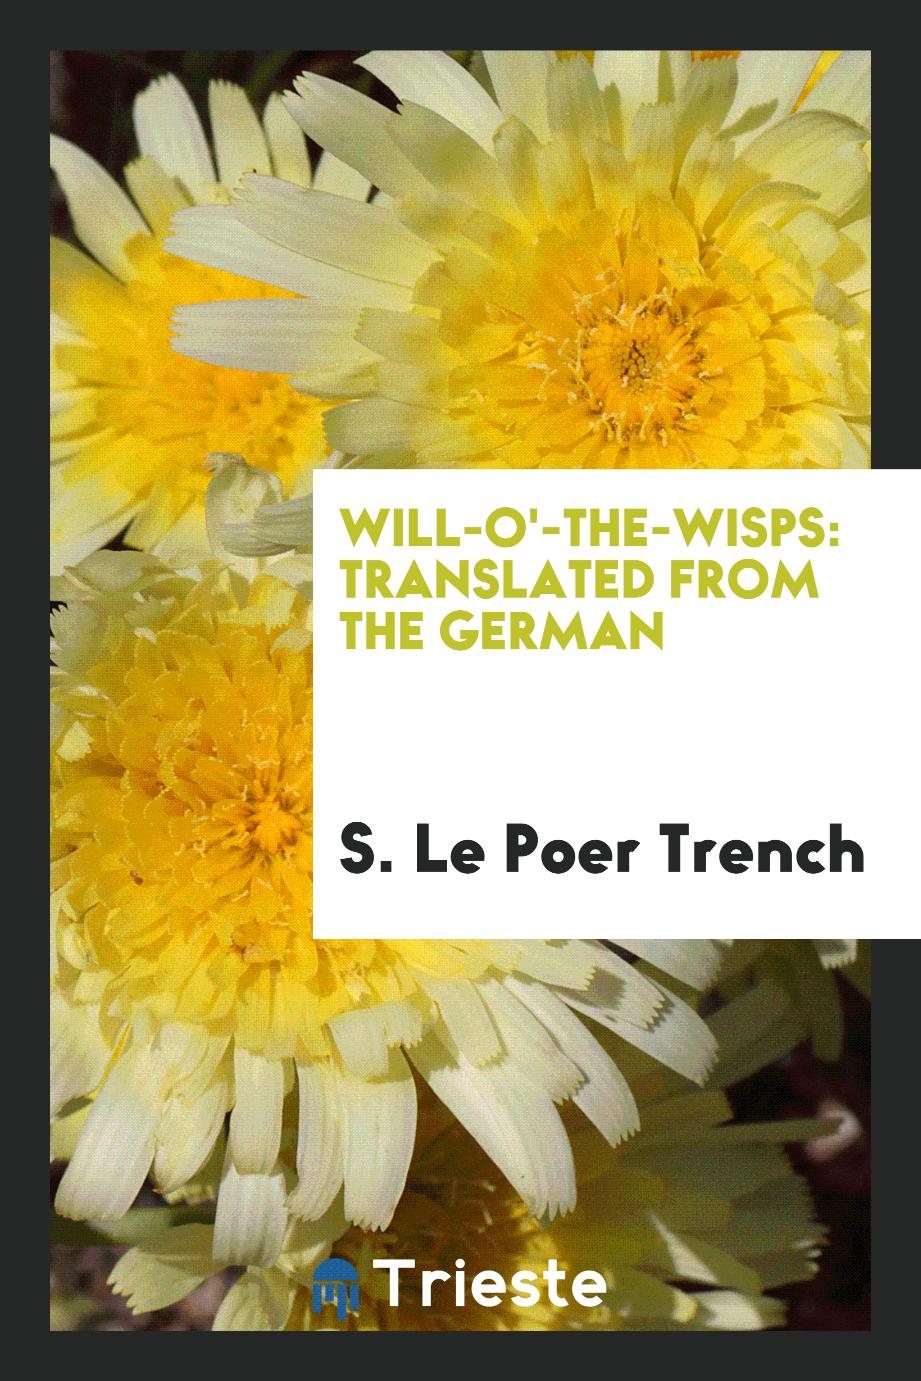 Will-O'-the-Wisps: Translated from the German